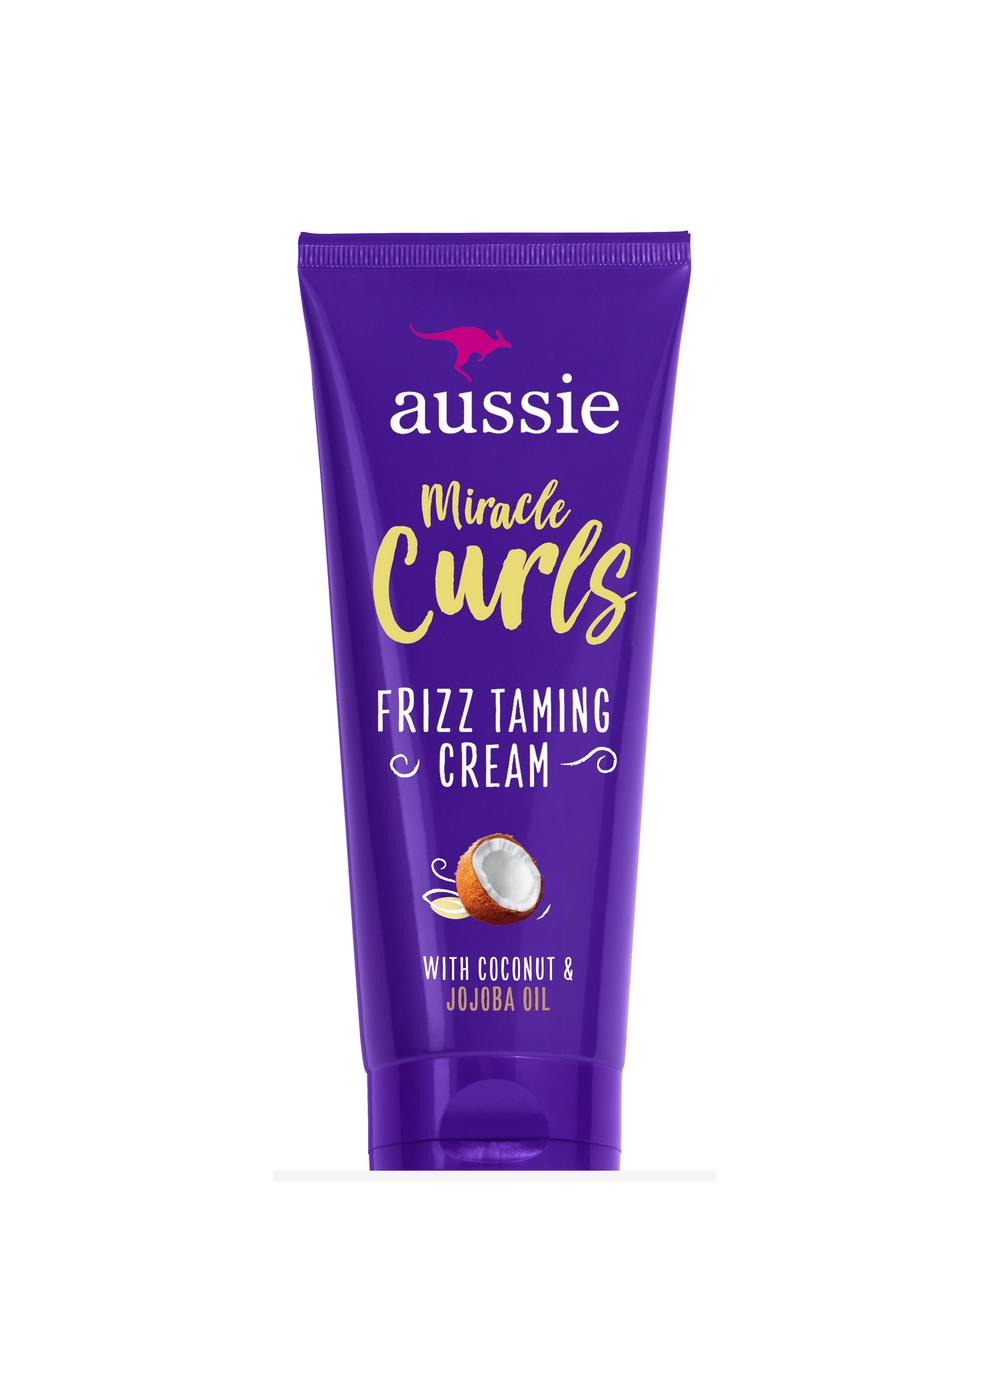 Aussie Miracle Curls Frizz Taming Cream; image 7 of 11